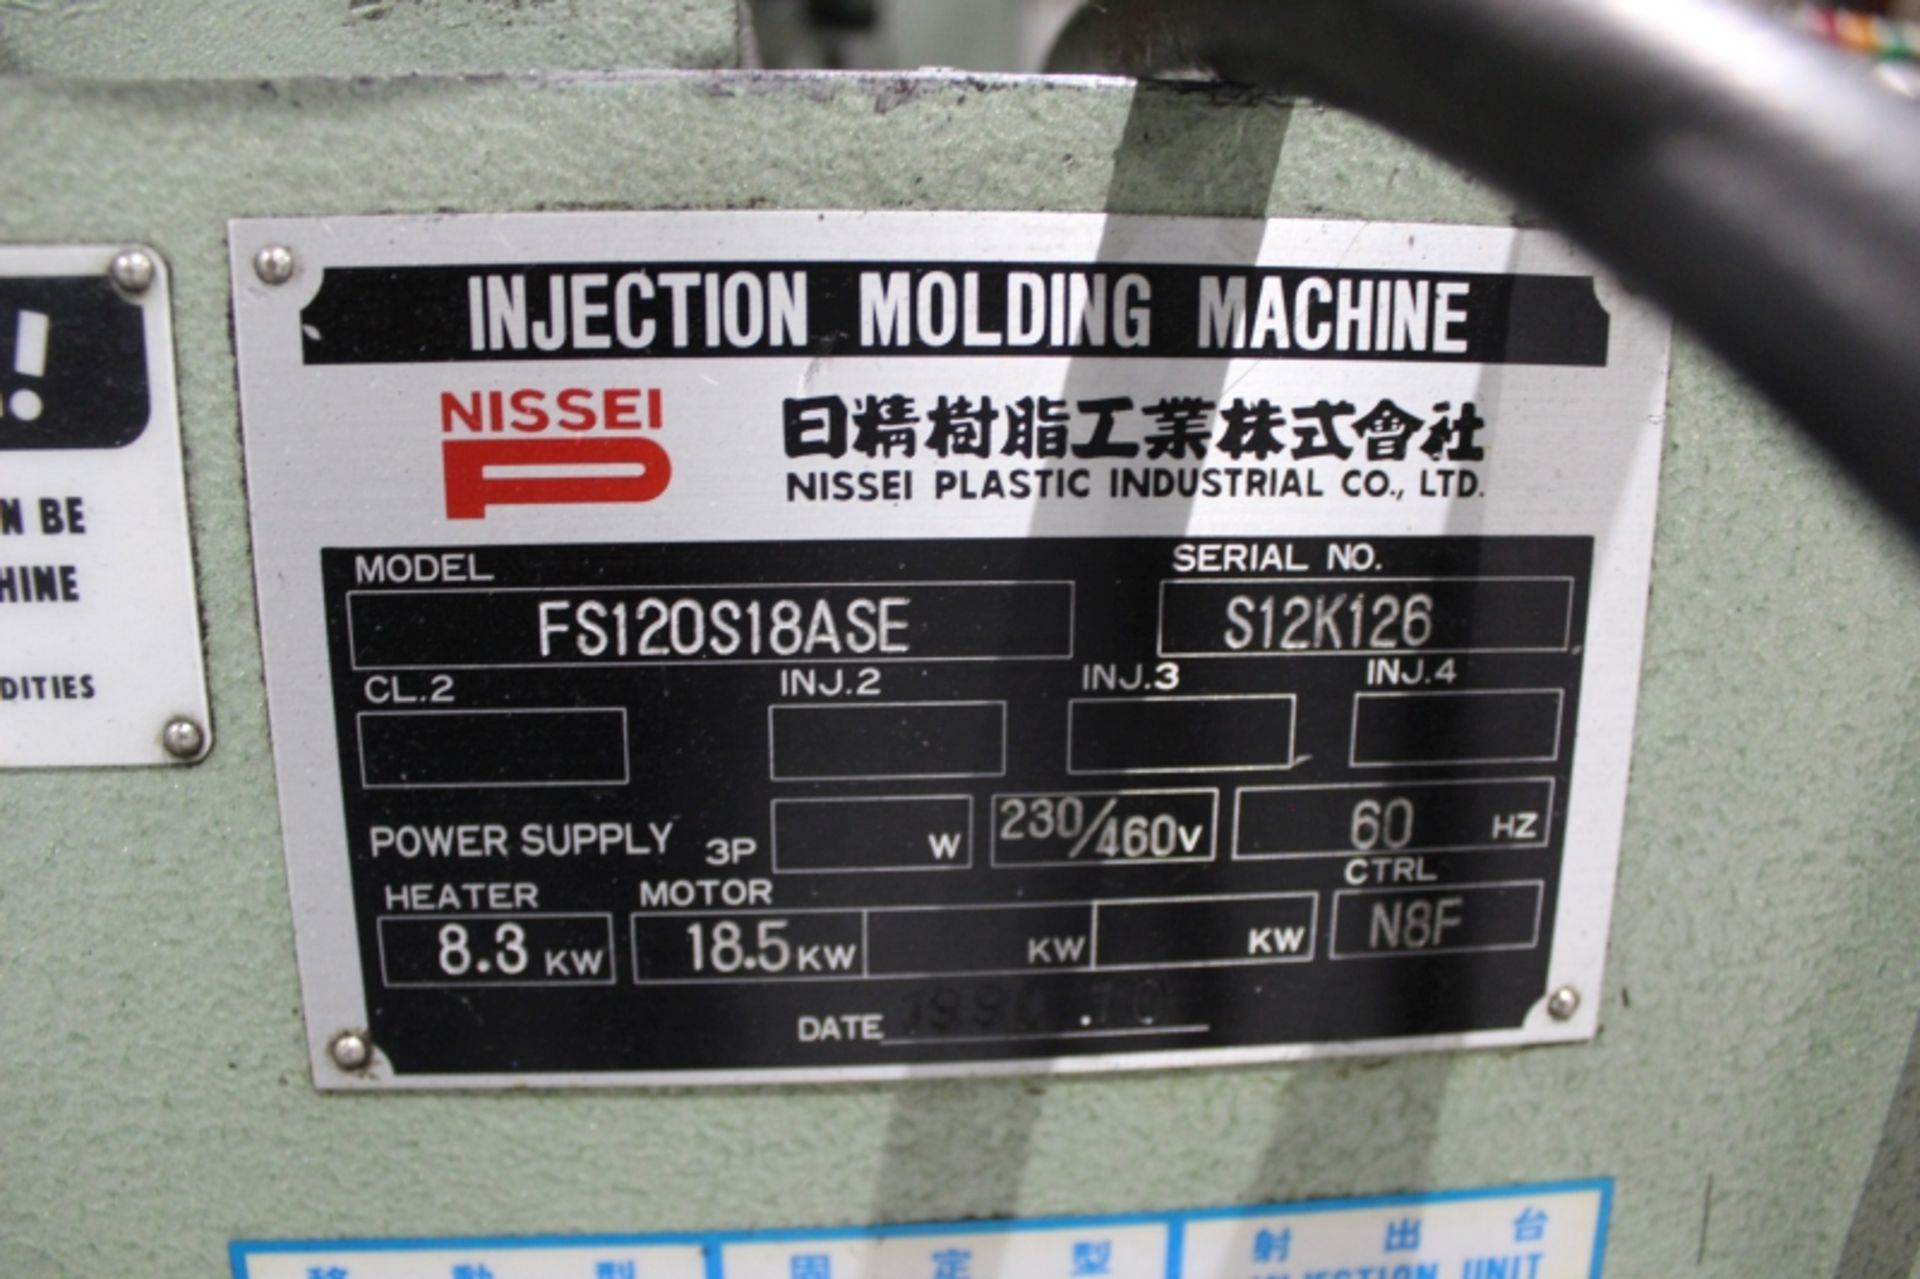 120 Ton 7.2 oz. Nissei FS120S18ASE Injection Molding machine, w/ NC8000F control, S/N S12K126, New - Image 7 of 7